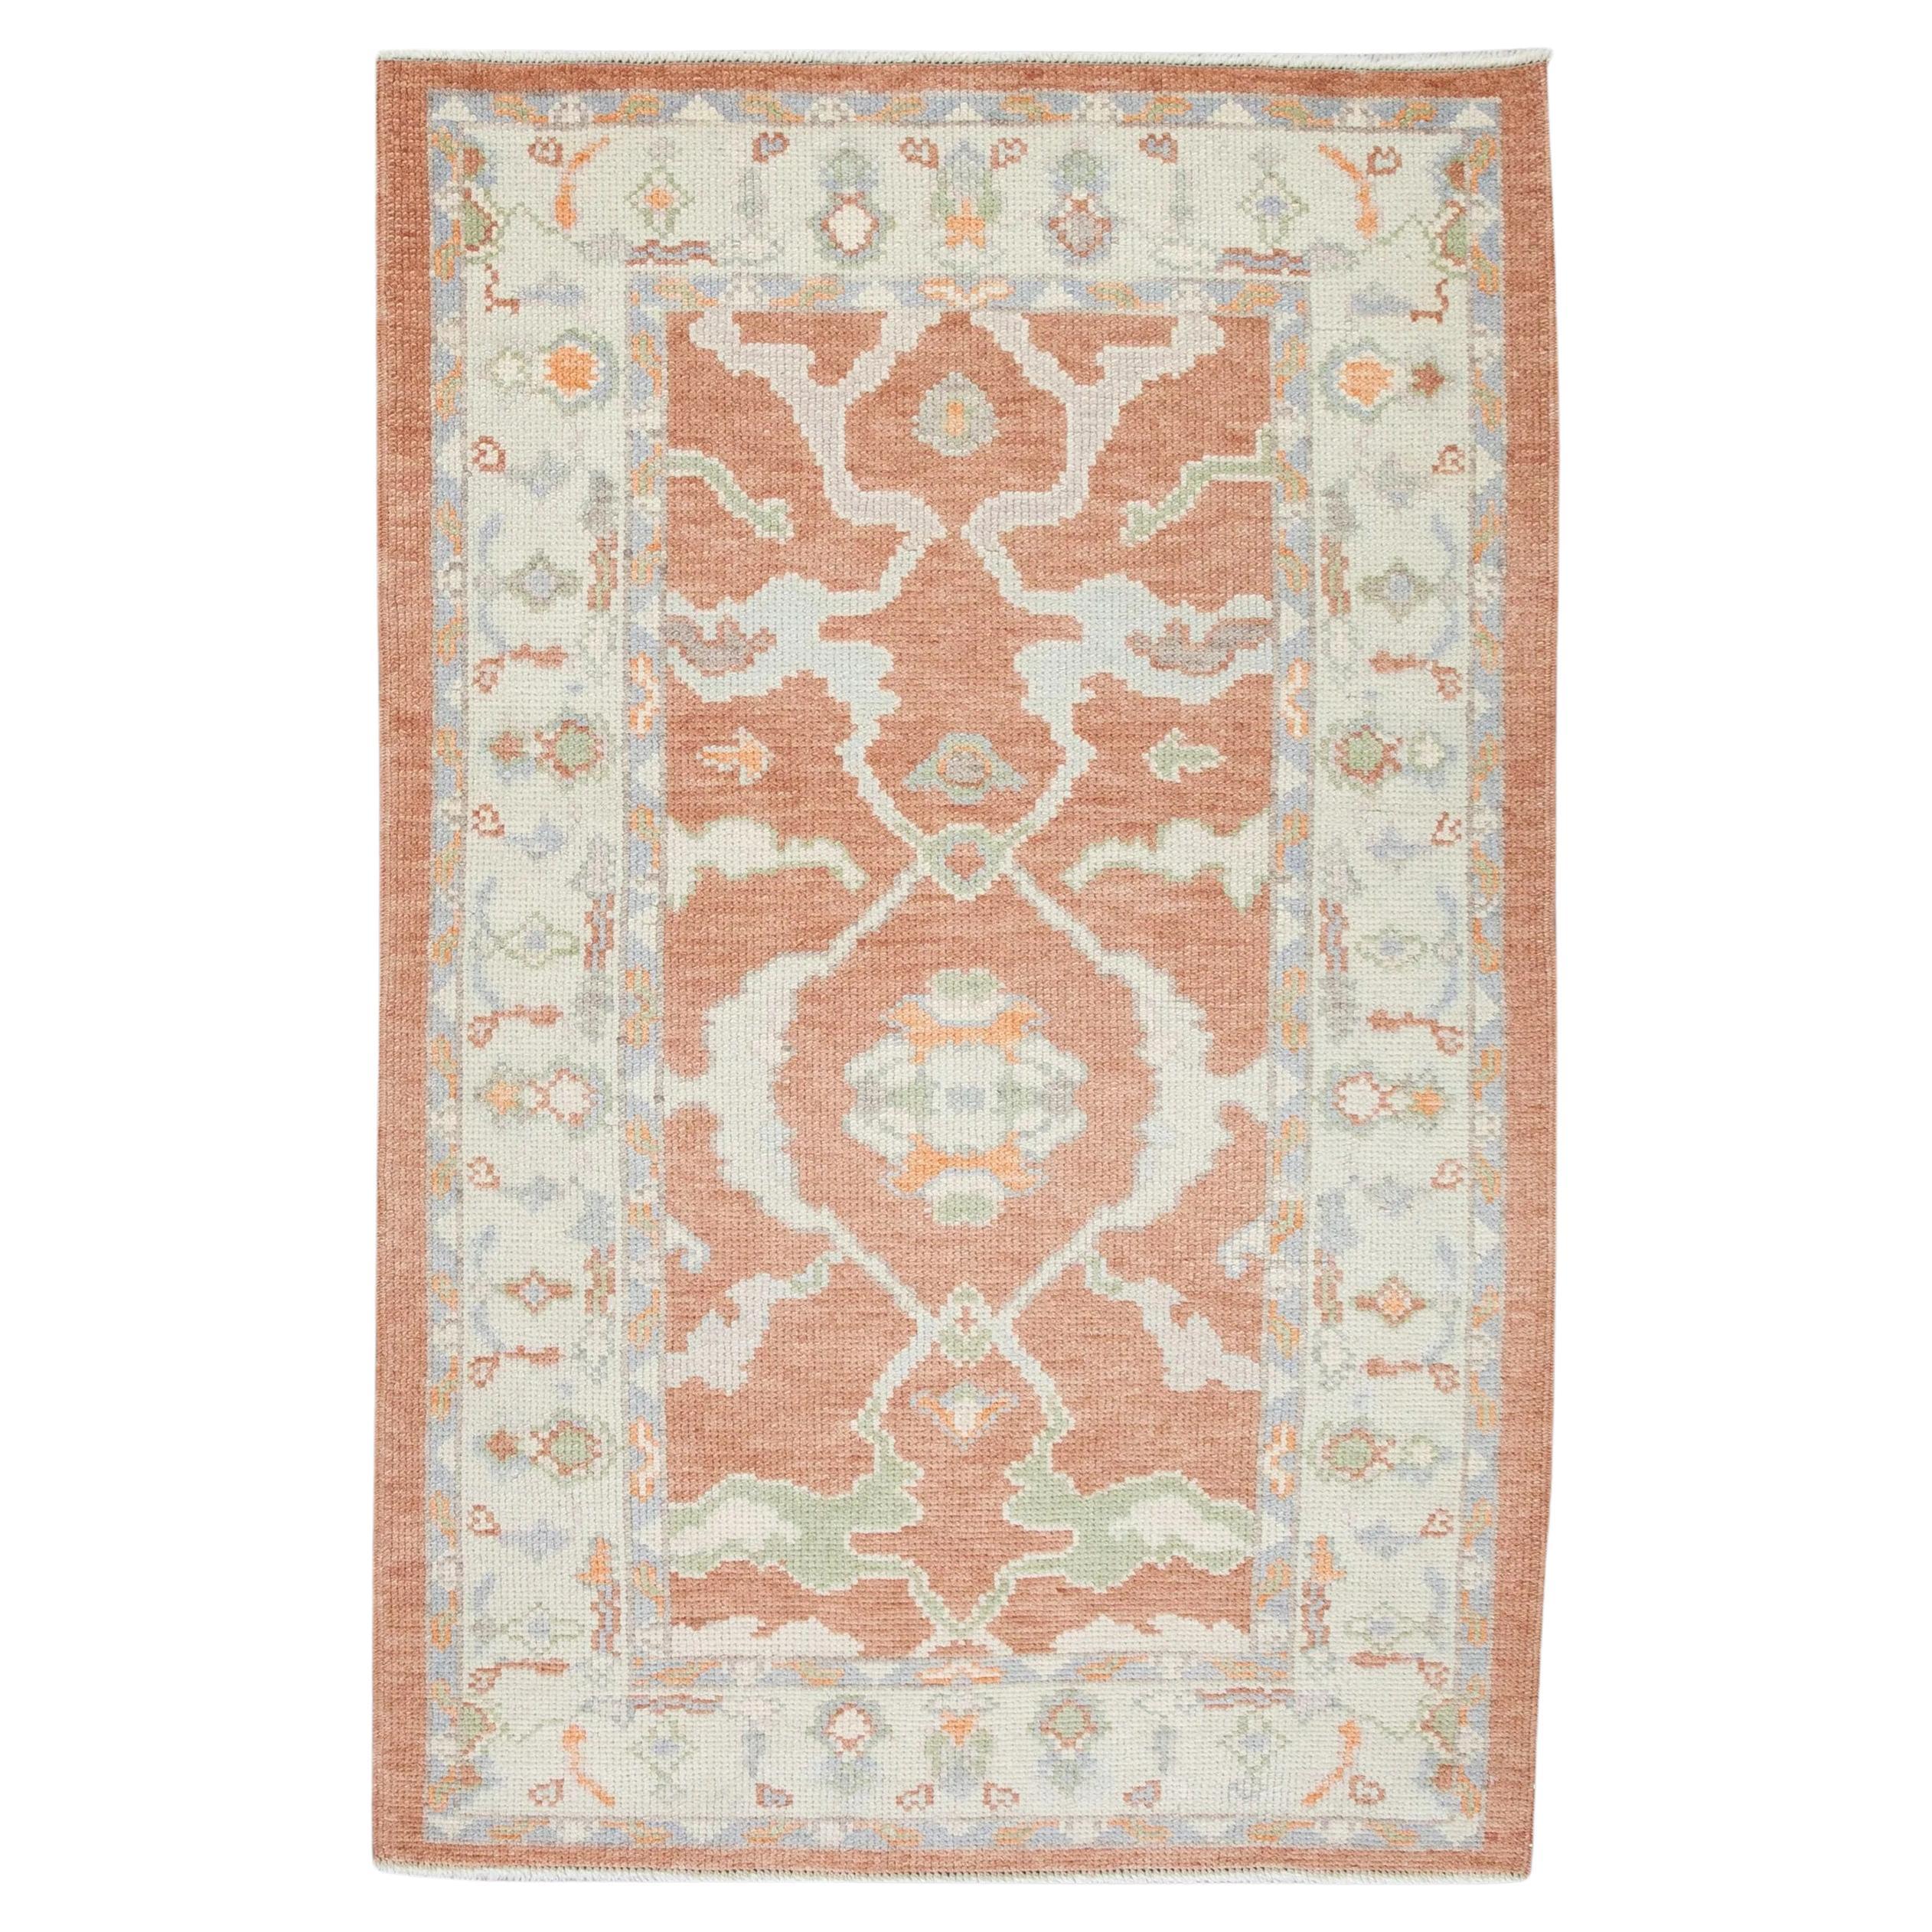 All-Over Floral Handwoven Turkish Oushak Rug in Coral, Cream, and Blue 3'2 x 5'1 For Sale